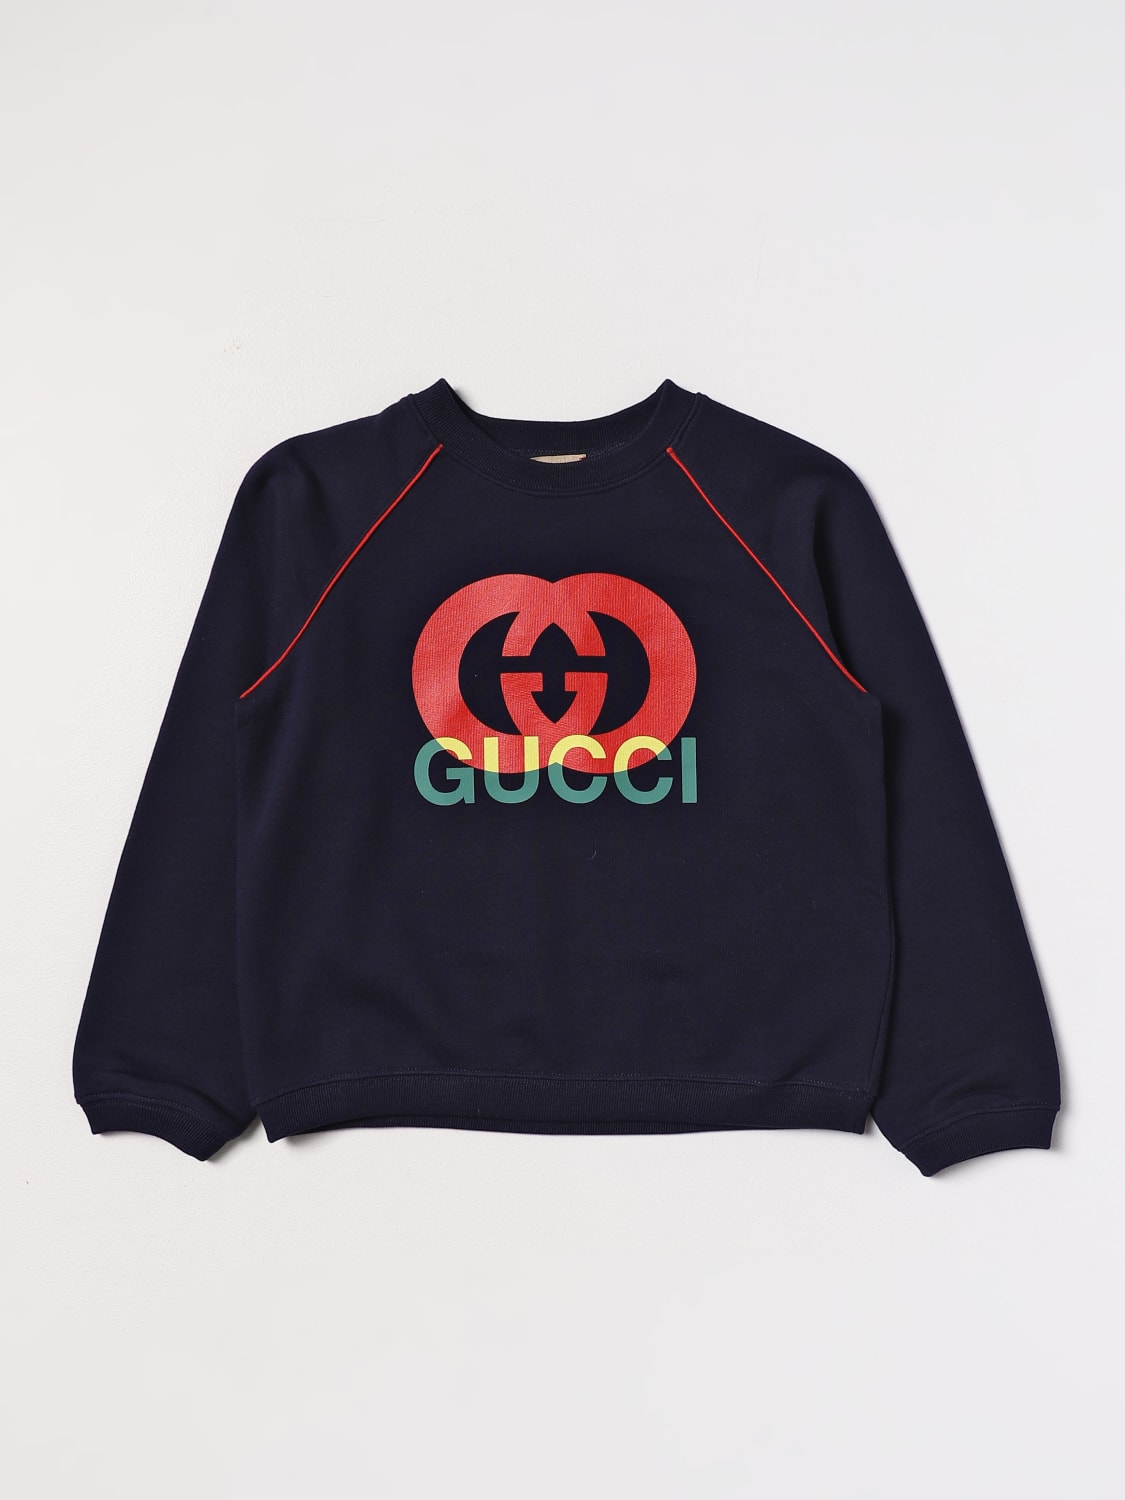 sidde chant bureau GUCCI: sweater for boys - Blue | Gucci sweater 737610XJFVS online at  GIGLIO.COM